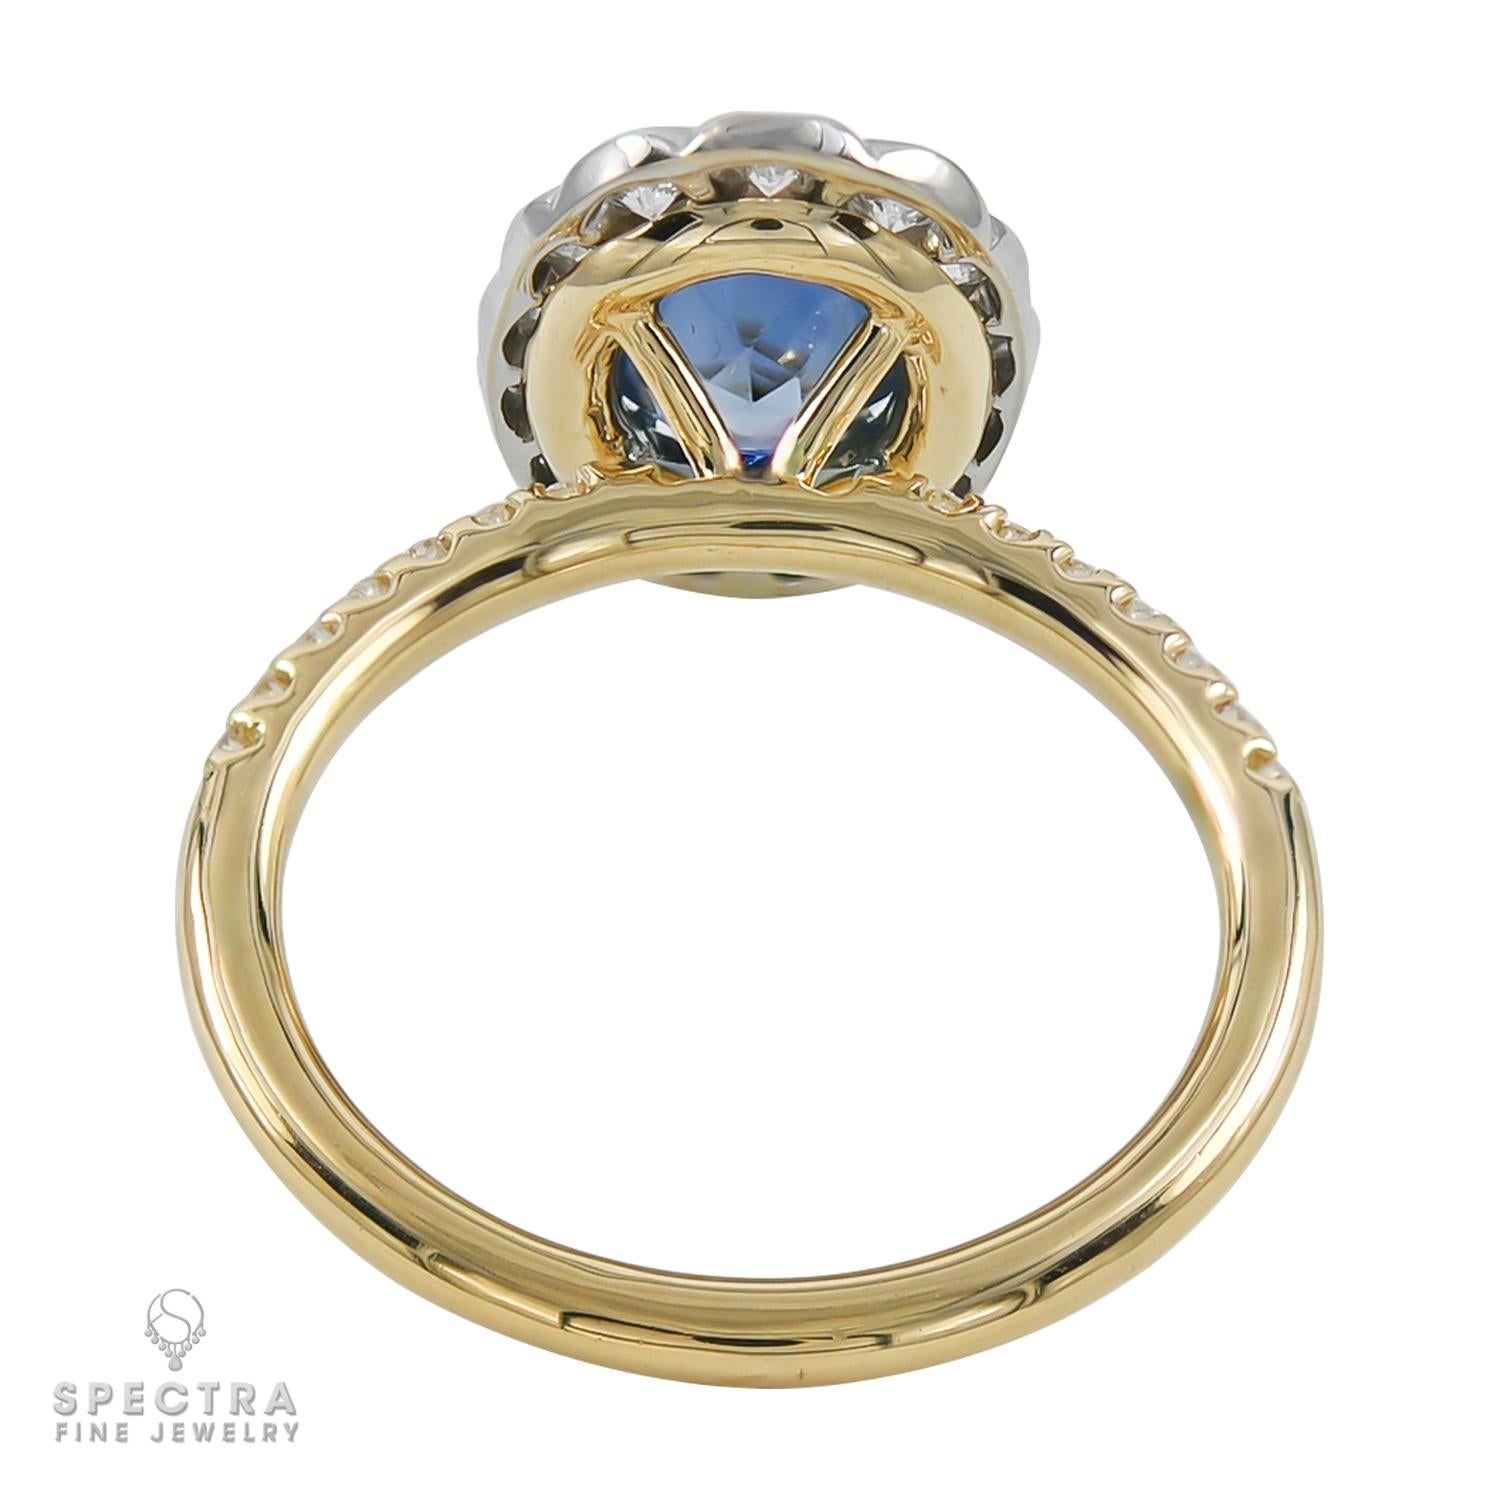 Oval Cut Spectra Fine Jewelry 1.42 Carat Sapphire Diamond Cocktail Ring For Sale